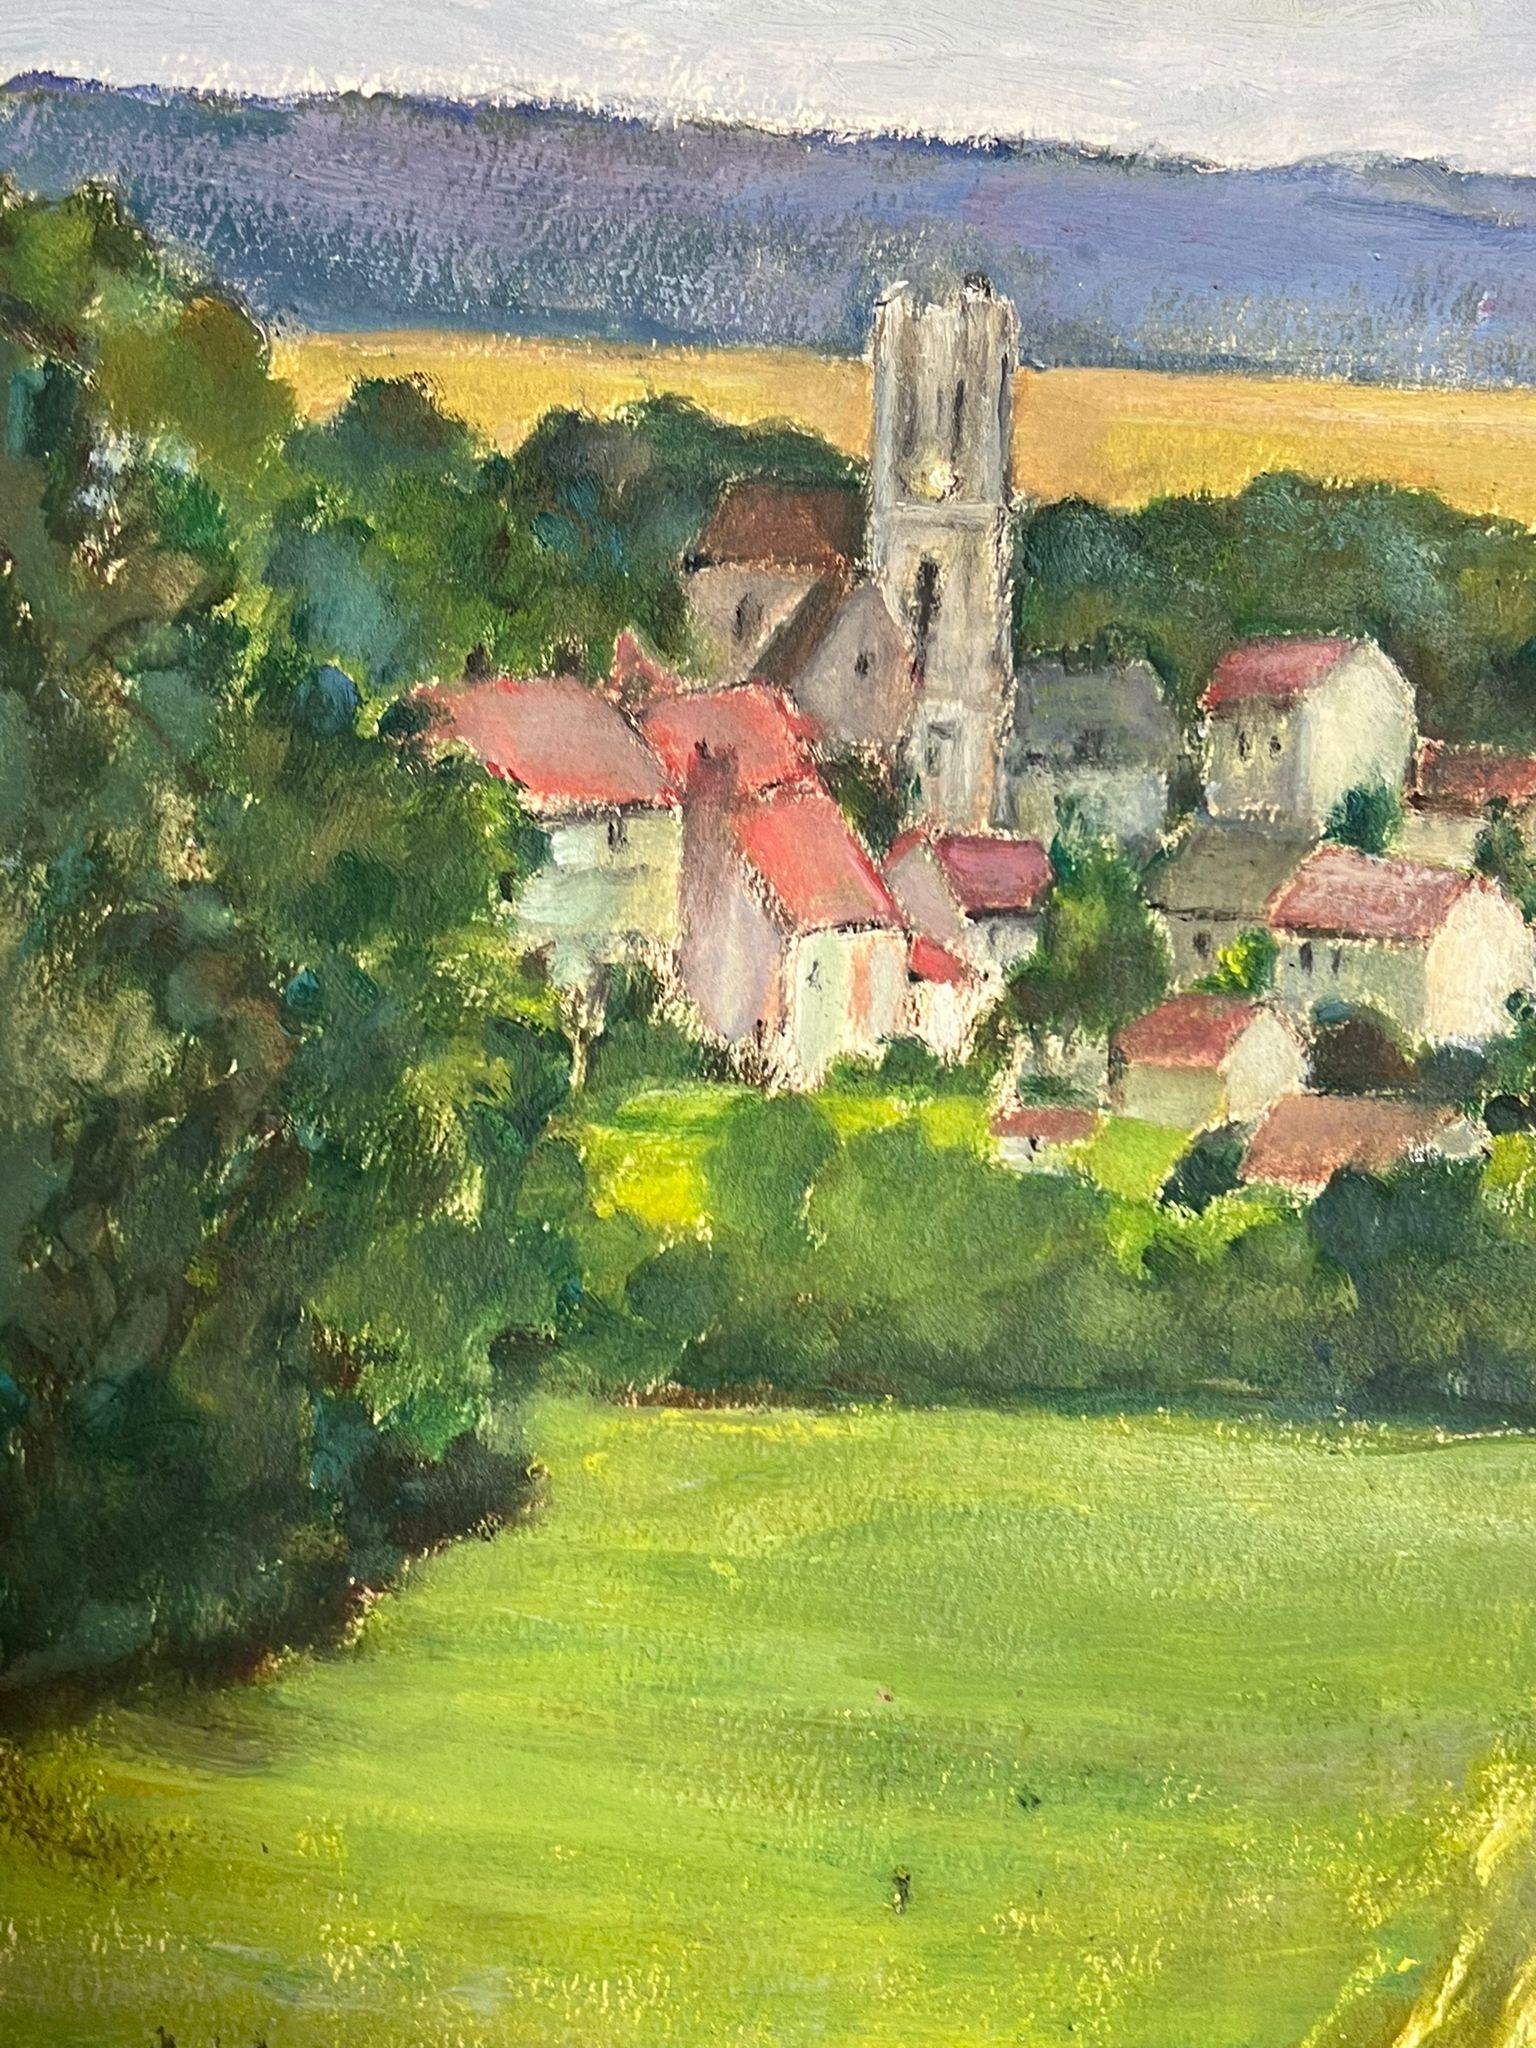 French Town 
signed by Louise Alix, French 1950's Impressionist 
gouache on artist paper, unframed
painting: 15 x 18 inches
provenance: from a large private collection of this artists work in Northern France
condition: original, good and sound